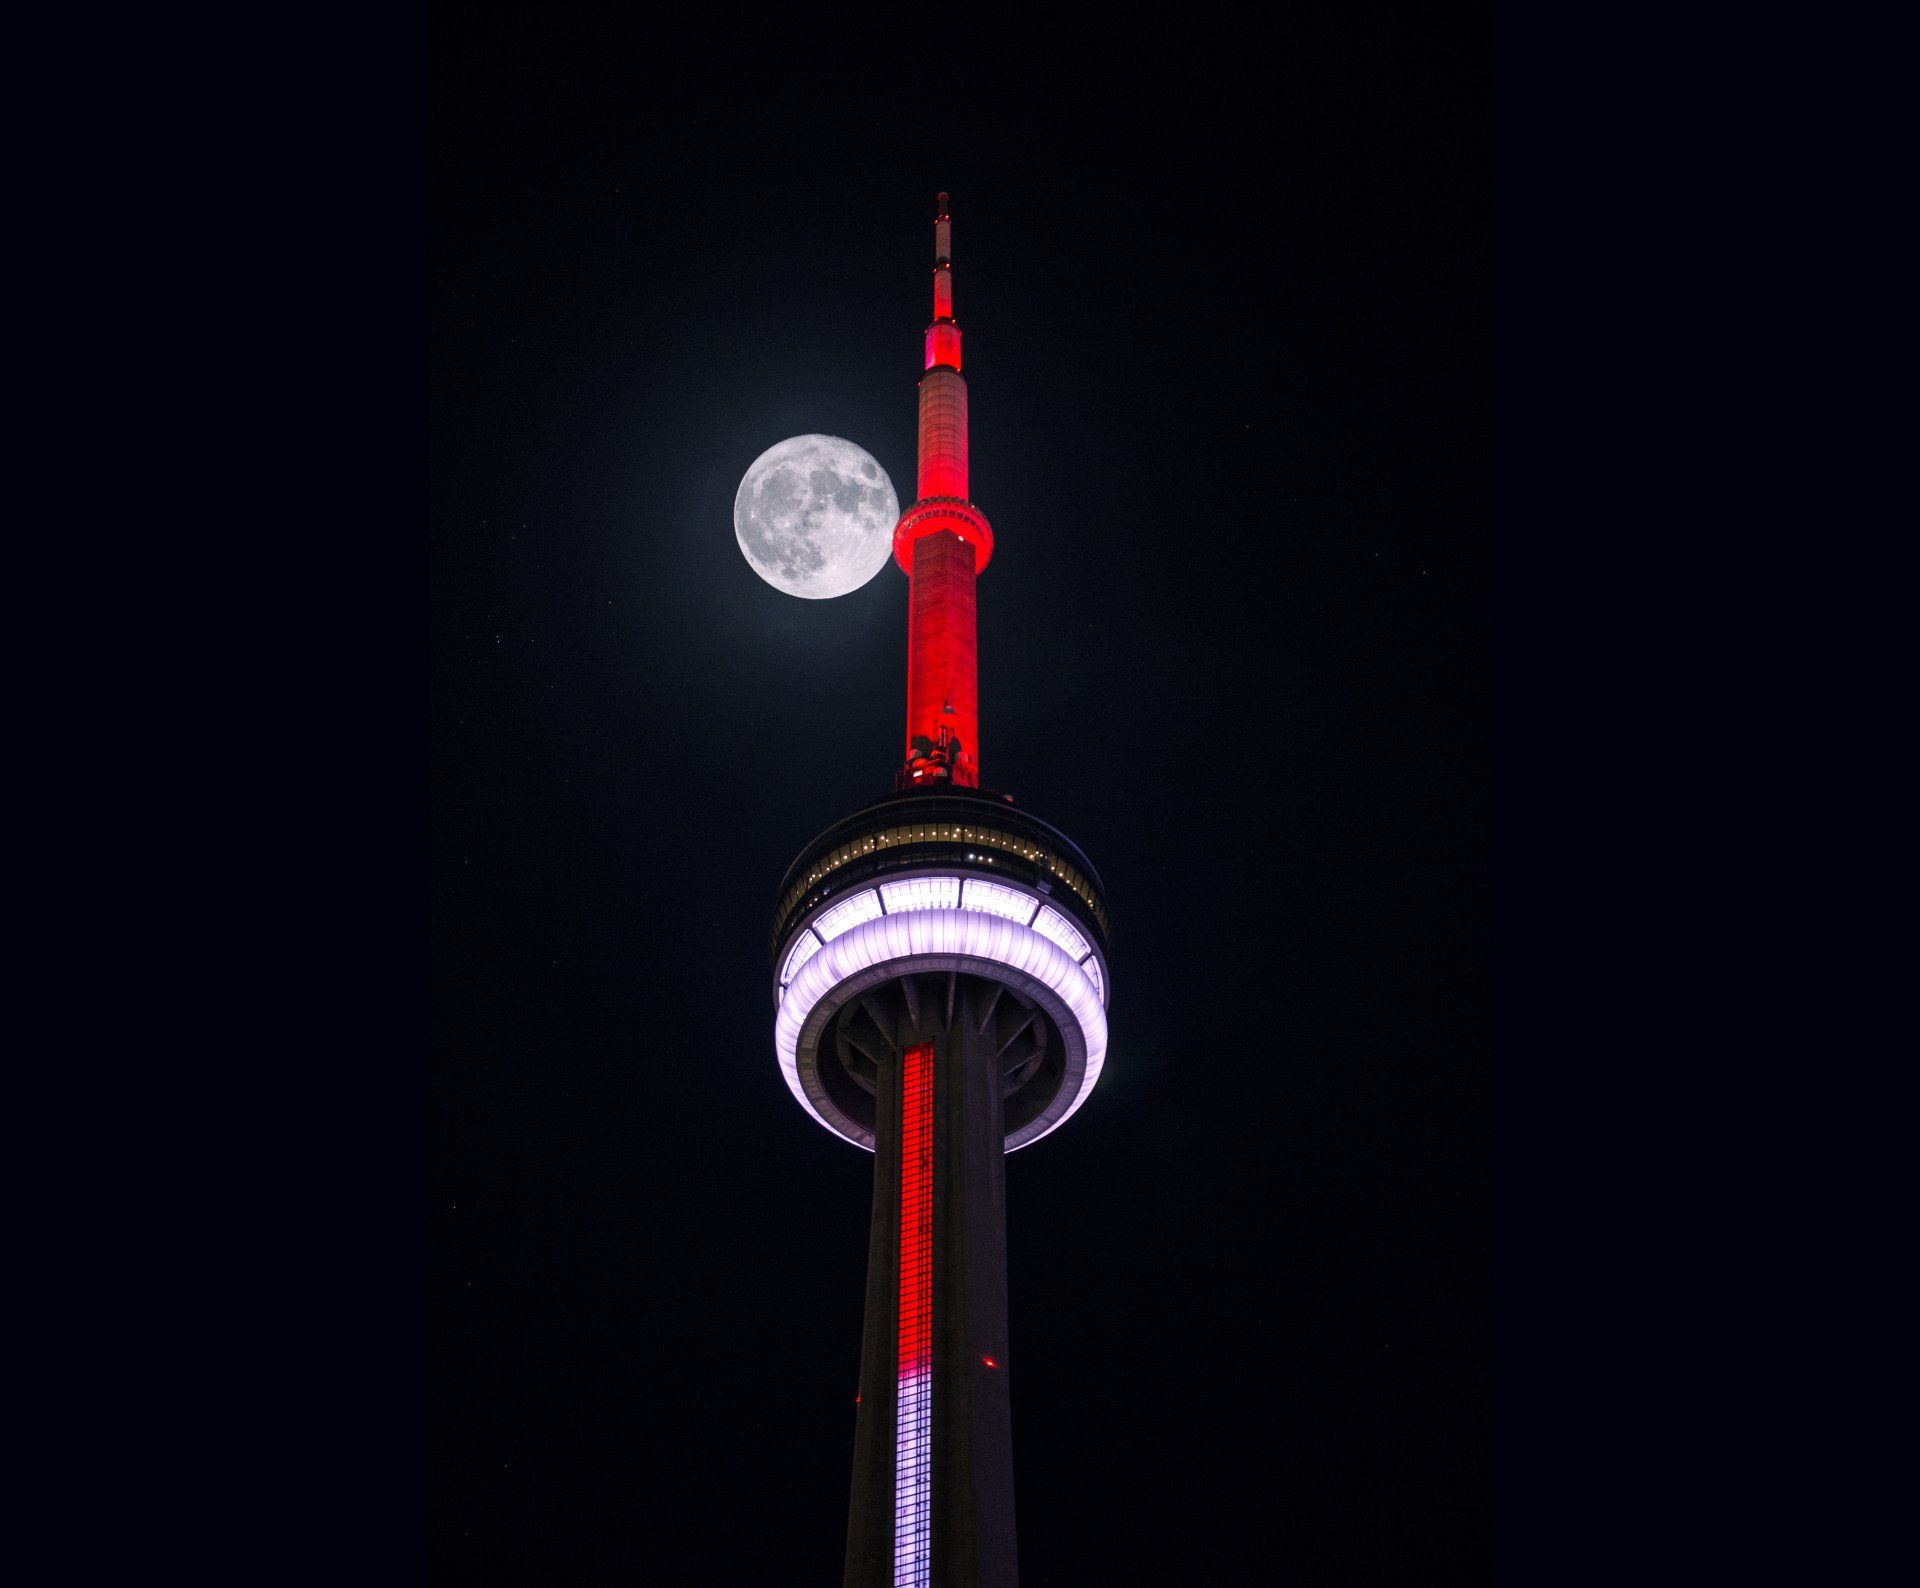 The cn tower is lit up at night with a full moon in the background.